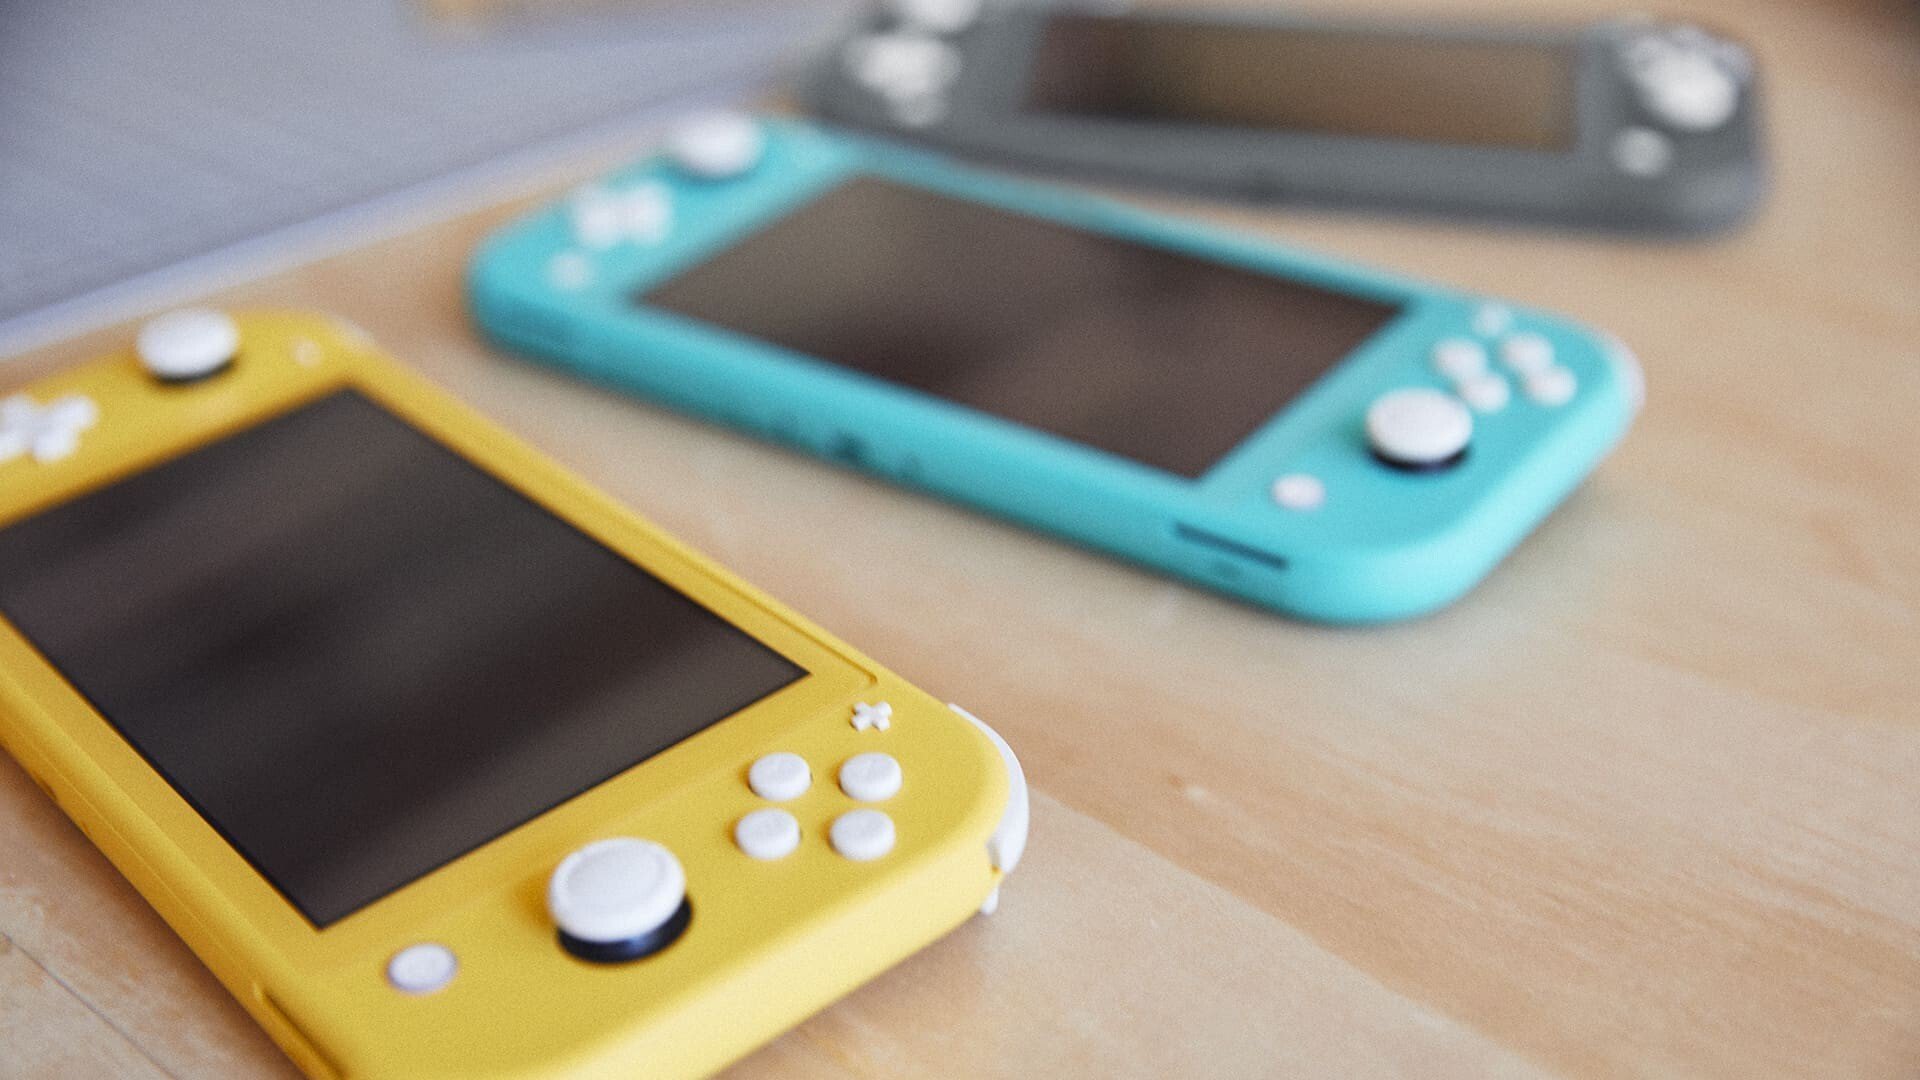 Nintendo refreshed its Switch line-up in 2019 with the cheaper Switch Lite. Gaming has boomed during the pandemic as people stayed indoors, but Nintendo has warned that a chip shortage this year could hit supplies. Photo: Handout